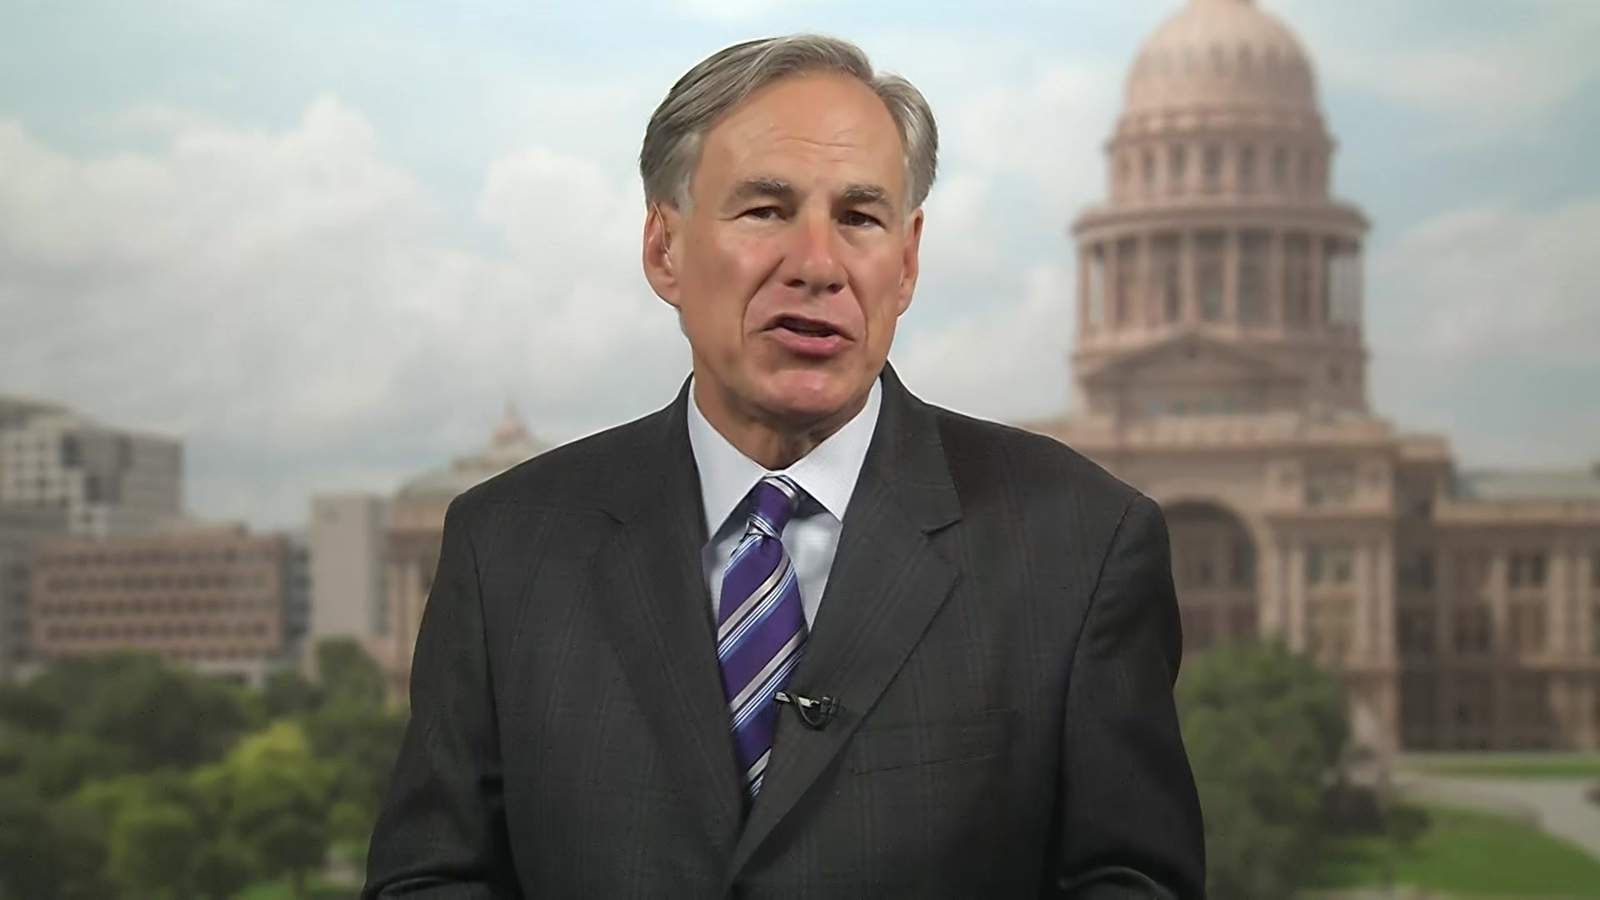 Gov. Abbott answers questions about masks in schools, what it would take to shut the state again, GOP convention in Houston and more